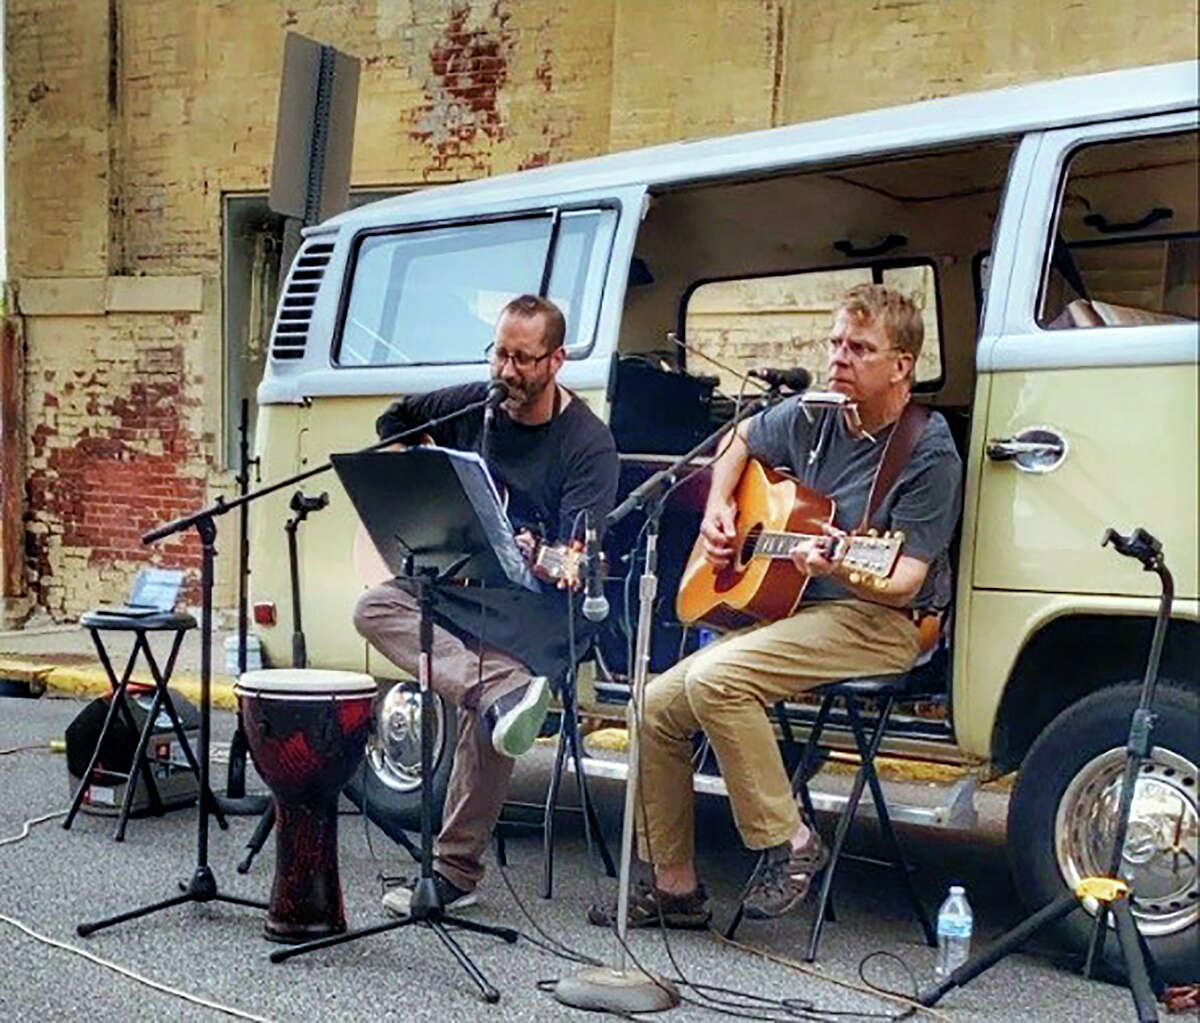 Jeff Newman and Jeff Davidsmeyer will perform Sunday as part of Jacksonville Public Library's Music Under the Dome series.